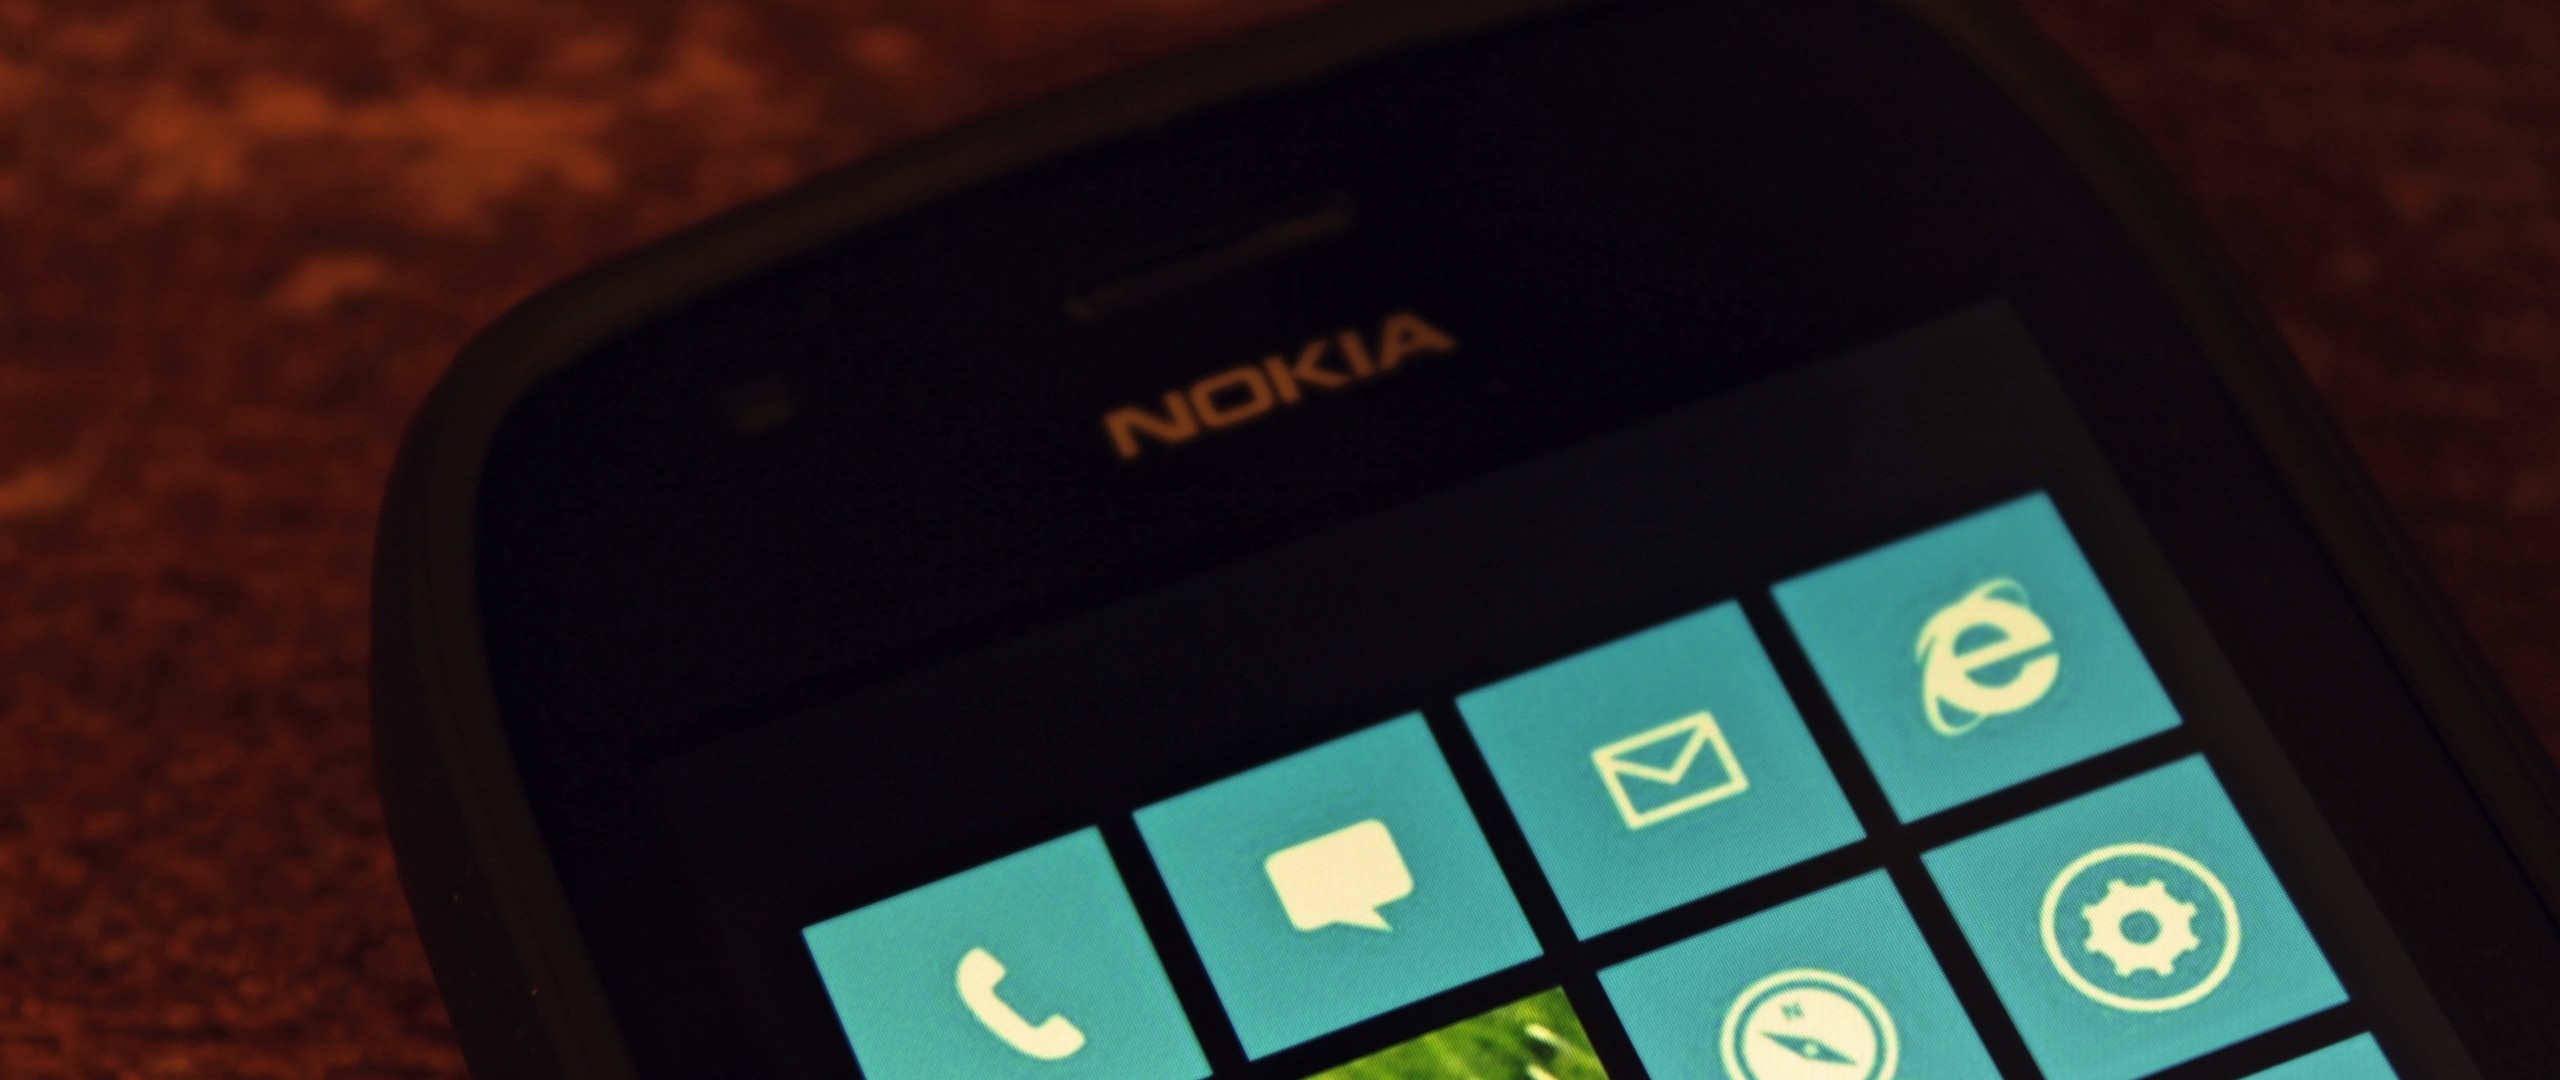 Wallpaper Wp8 Nokia Touch Screen Mobile